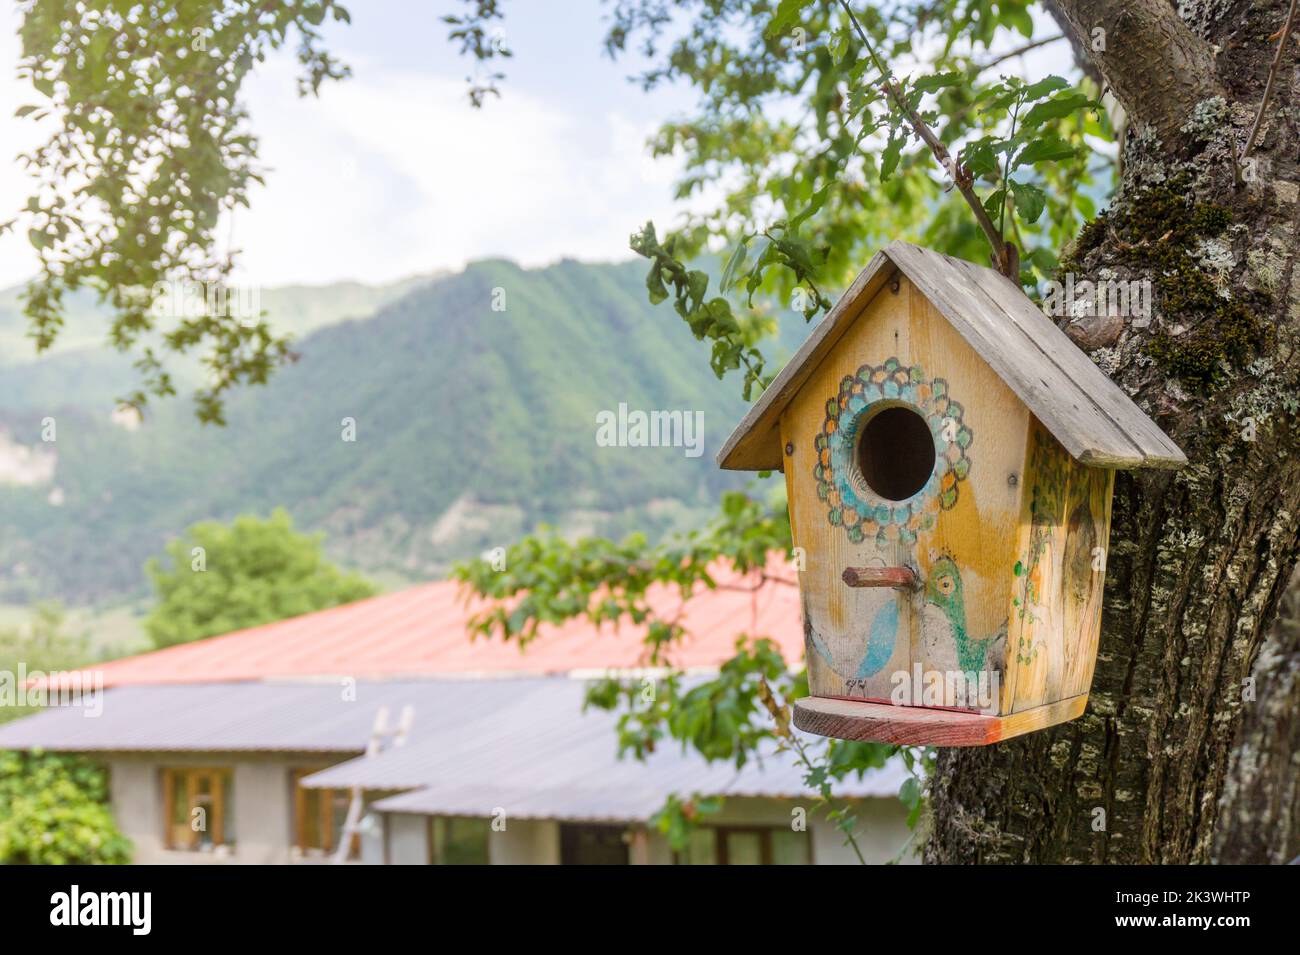 Wooden birdhouse on a tree in the garden. Little yellow cute decorated nesting box on a Summer day. Stock Photo